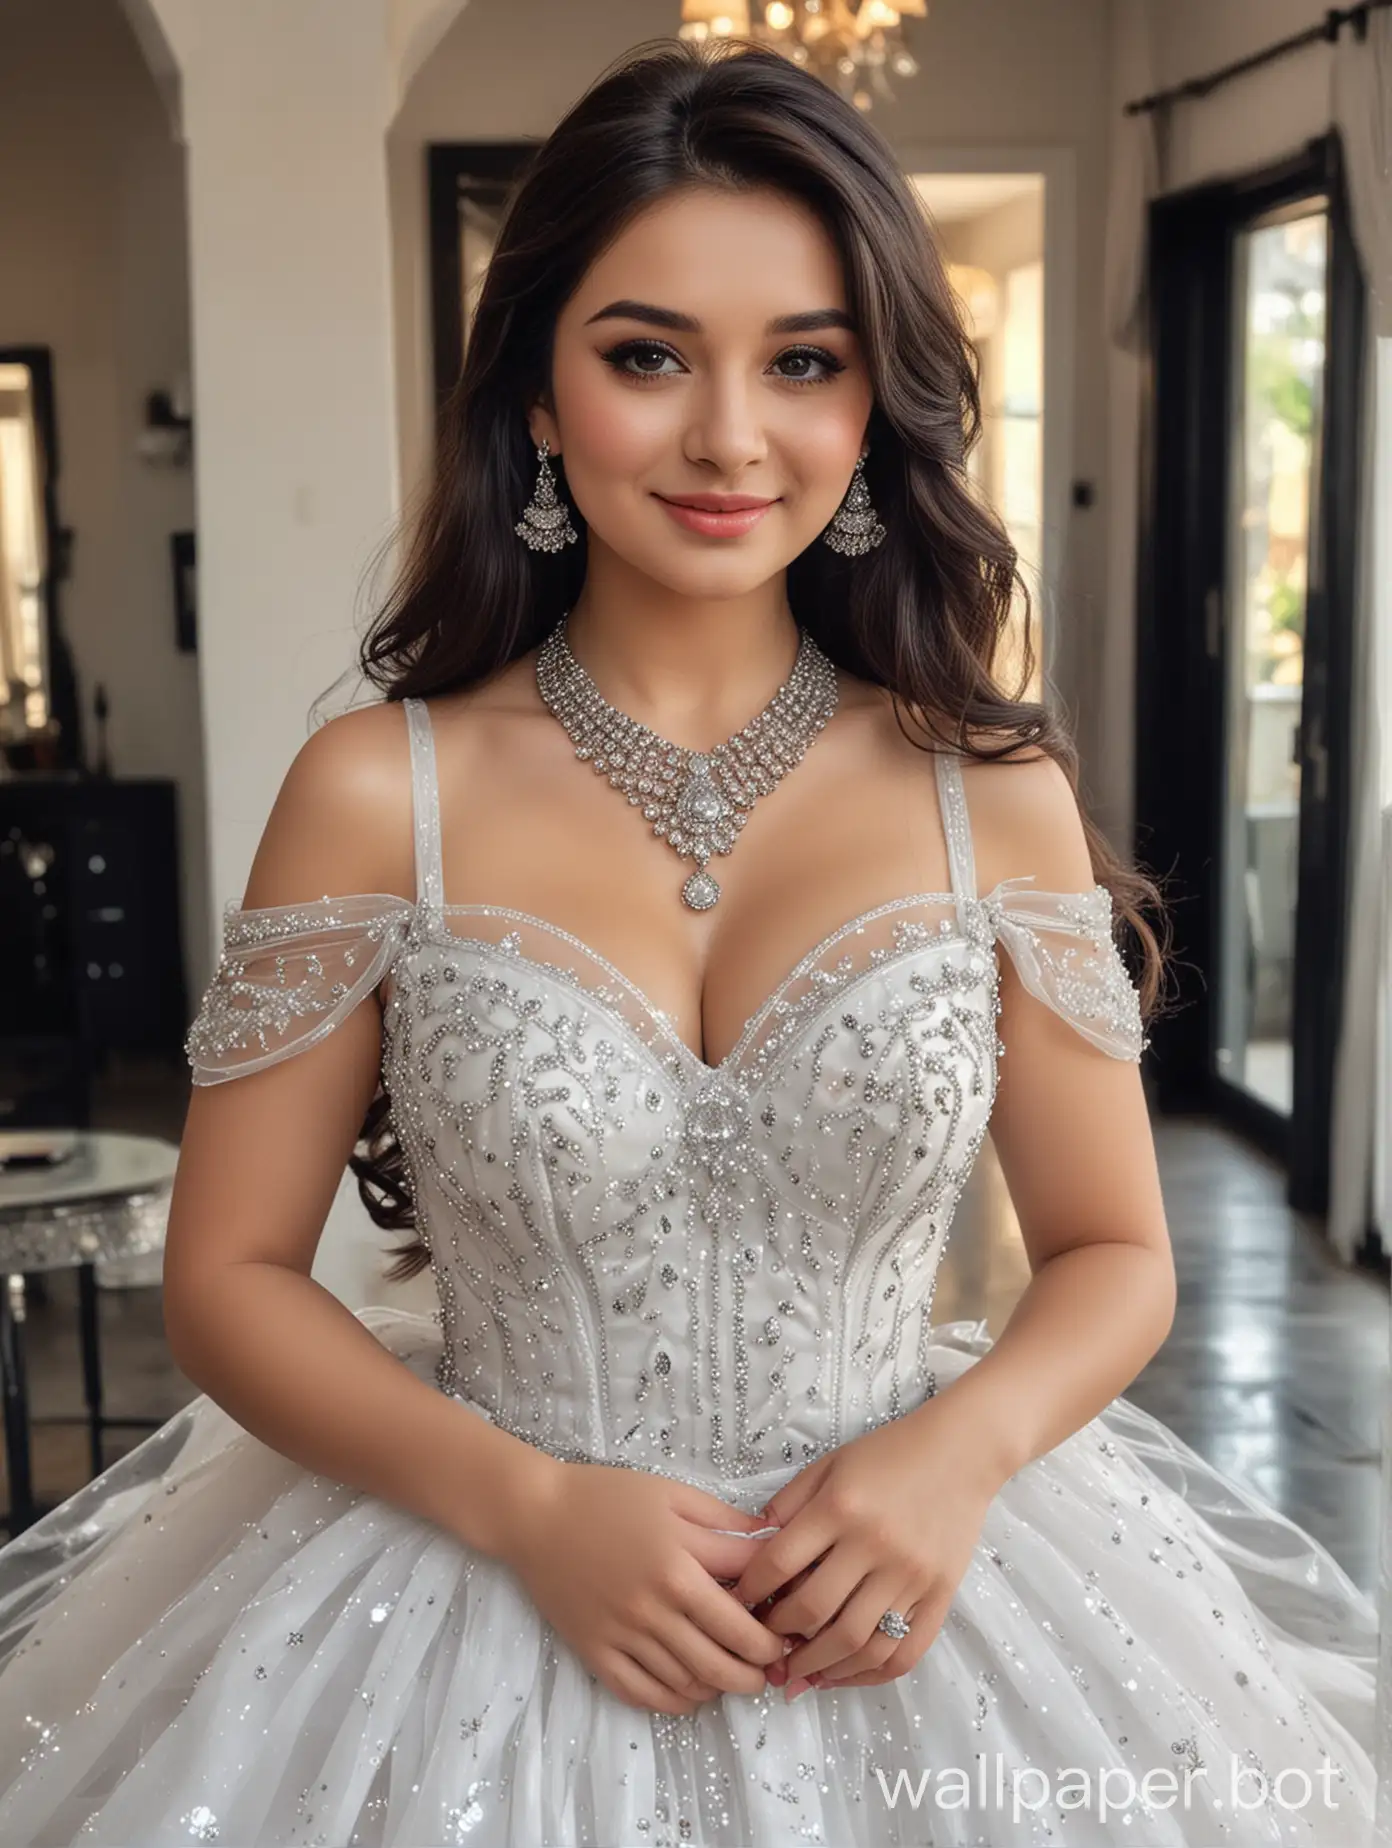 Generate an image of most beautiful Turkey actress cute pretty girl big tits , wearing  Ball Gown dress Transparent  ,  with a fair white skin tone and long hair black. She has a round face smile . The background is a modern house interior. The camera shot captures her from head to stomach . She is wearing makeup and has a necklace , jhumka ear ring and bracelet on.